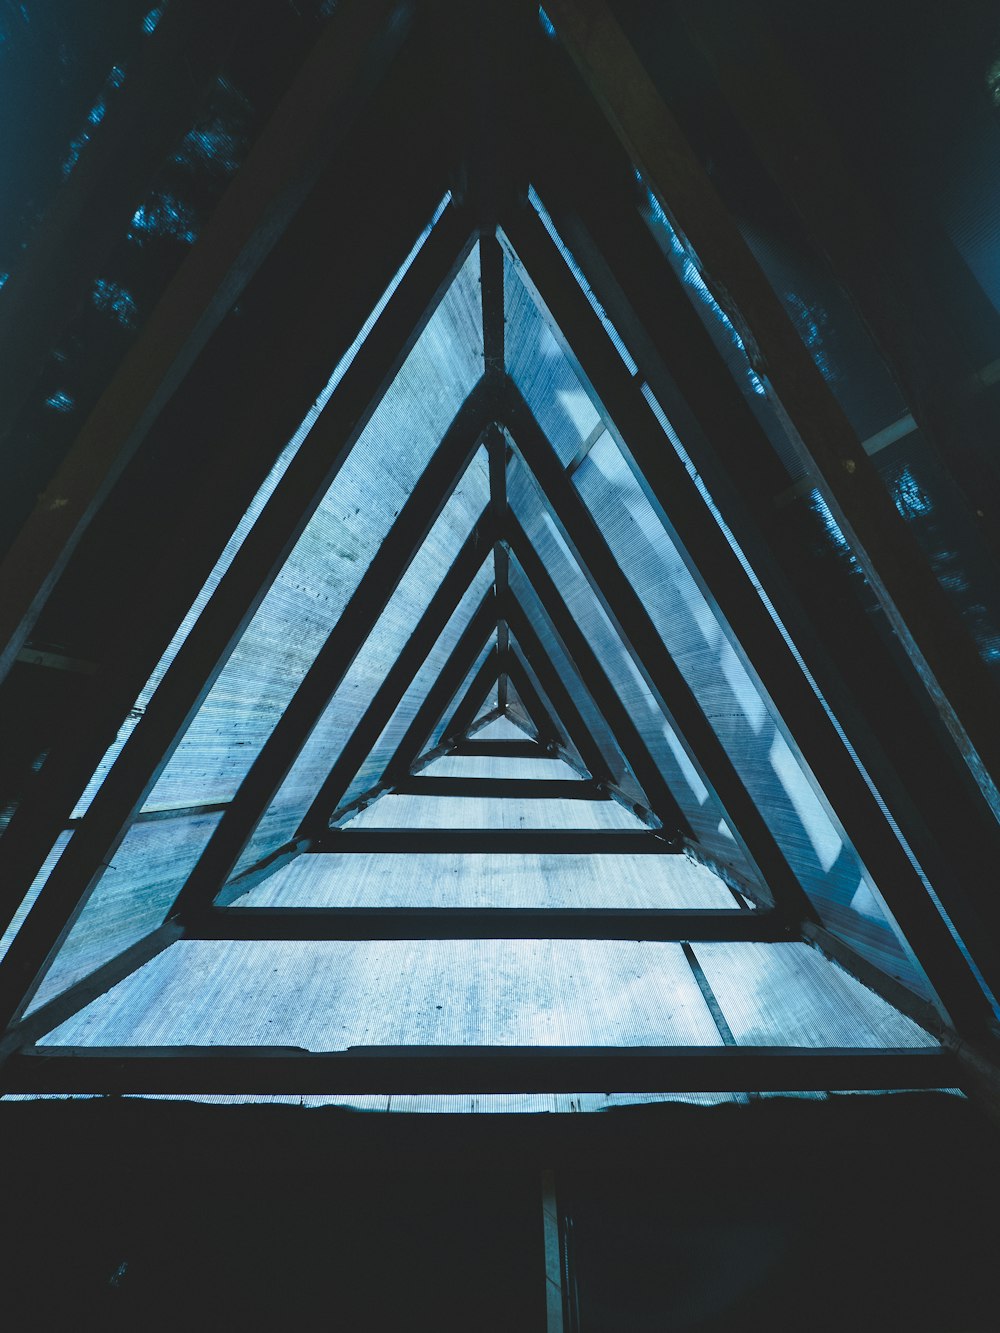 500+ Triangle Pictures [HD] | Download Free Images & Stock Photos on  Unsplash